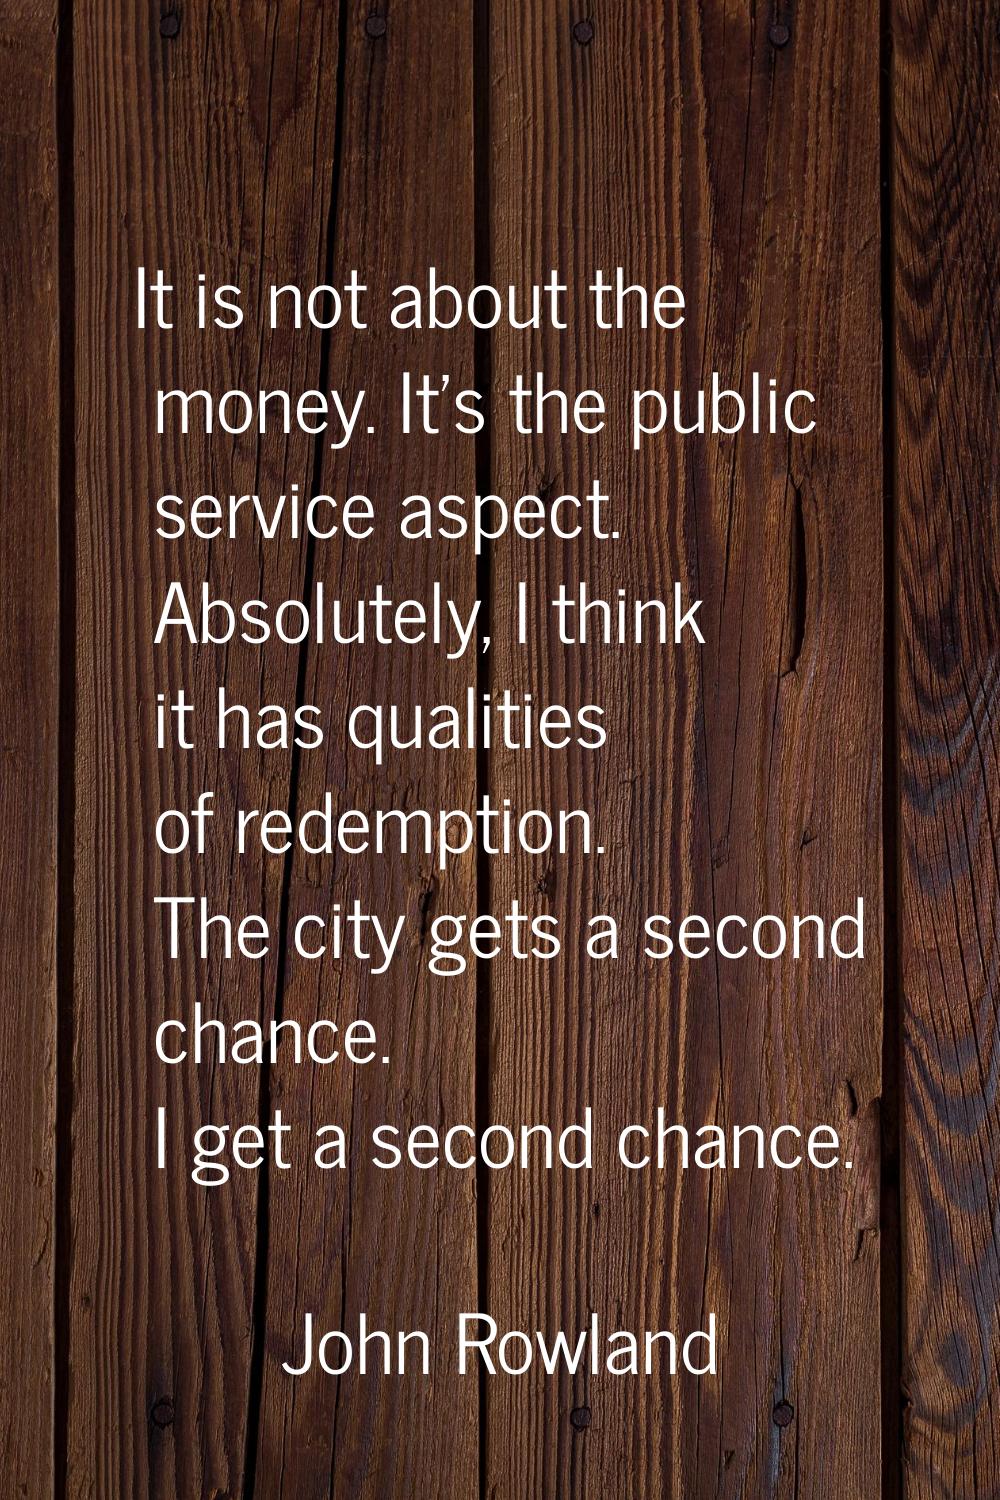 It is not about the money. It's the public service aspect. Absolutely, I think it has qualities of 